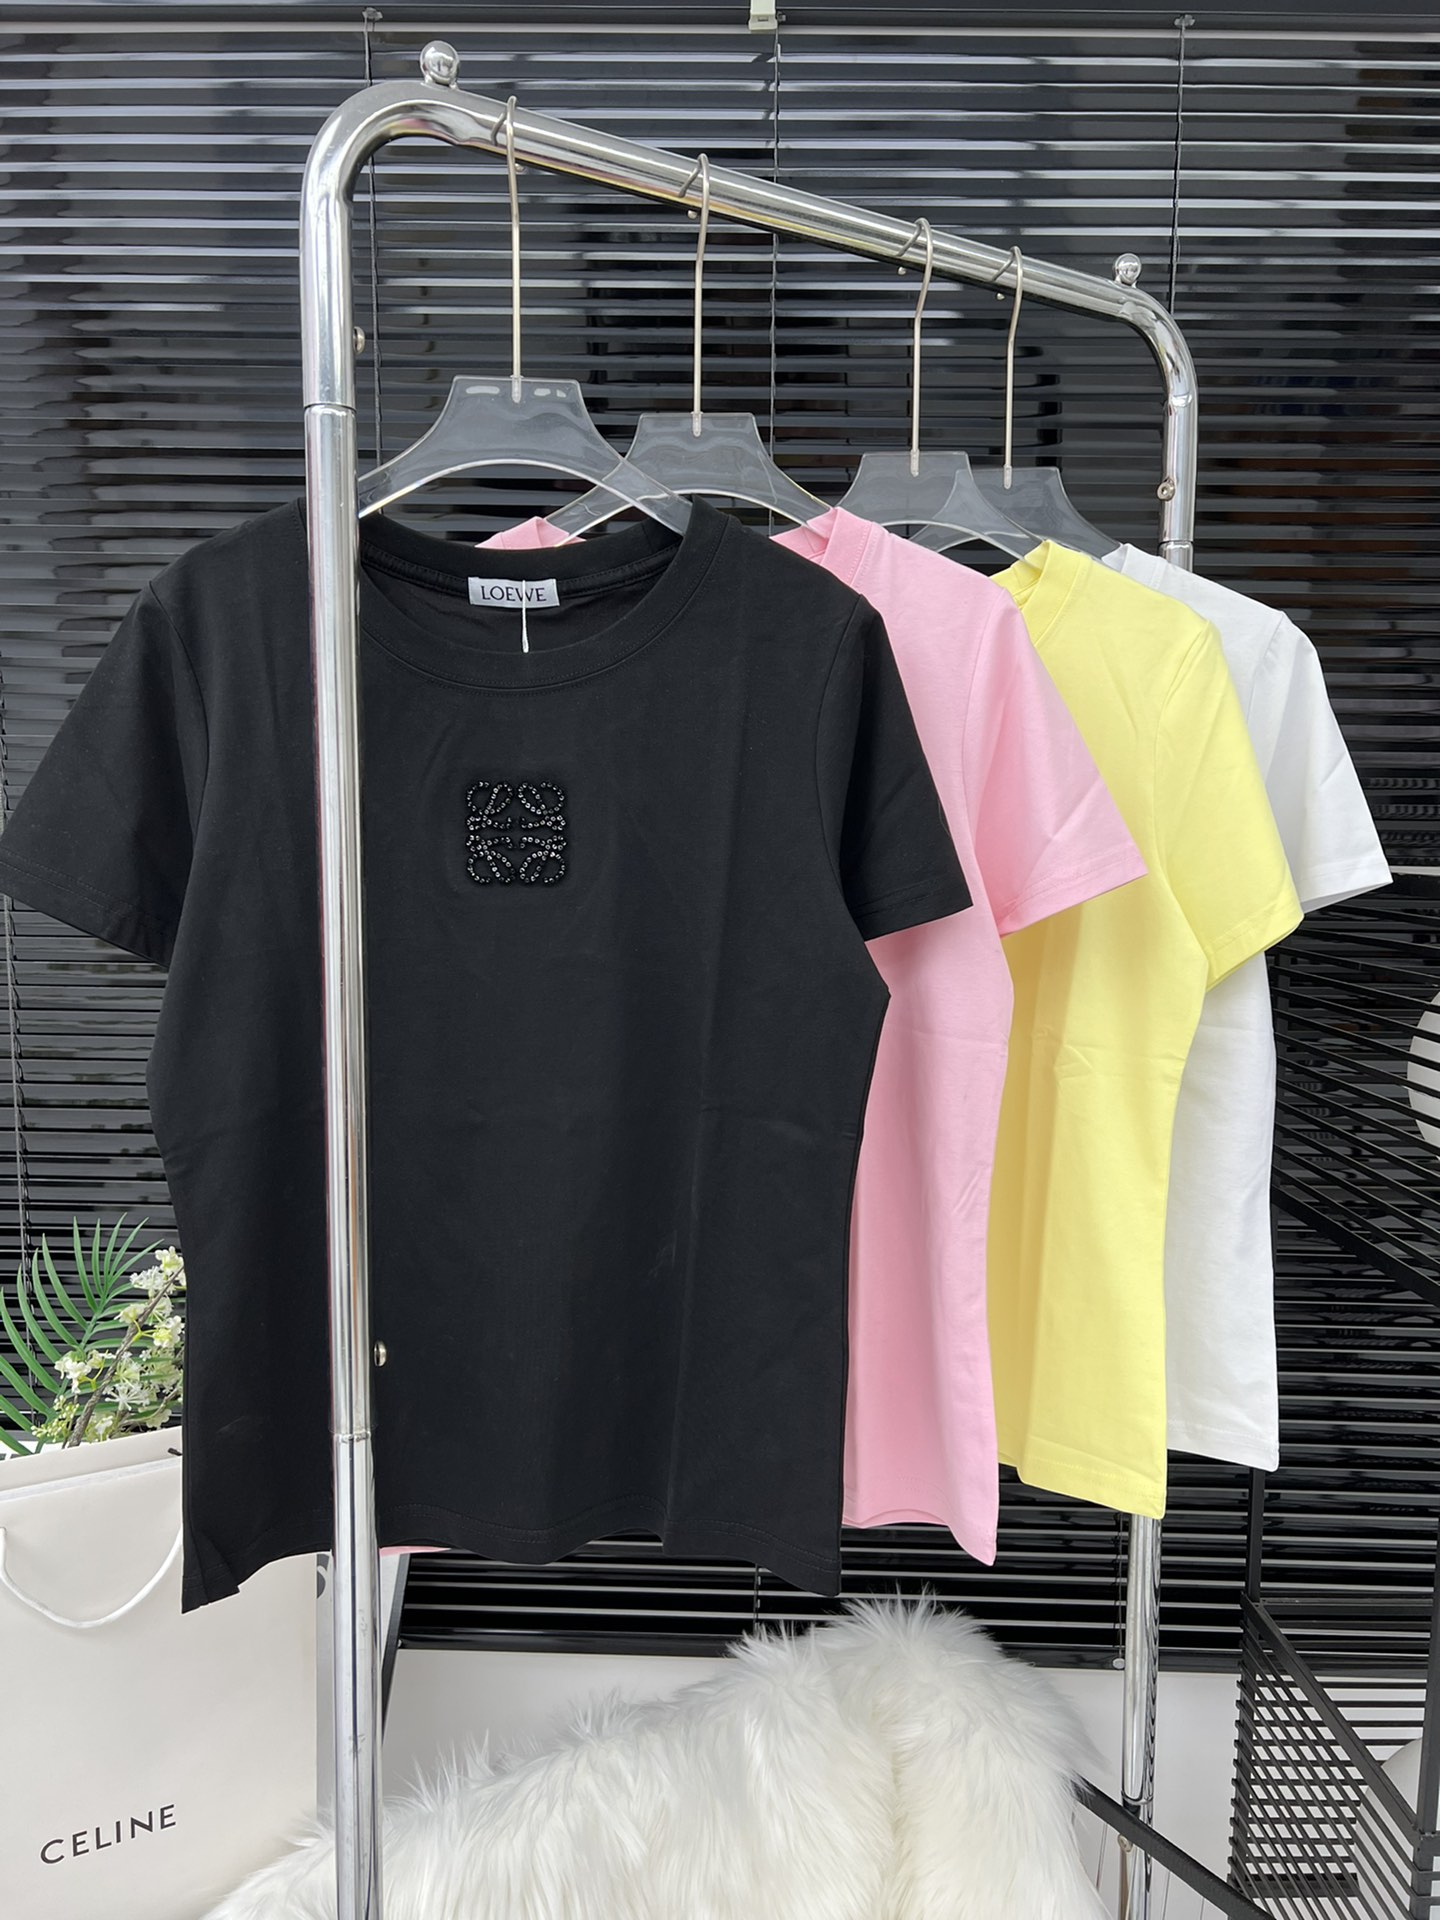 Loewe Clothing T-Shirt Embroidery Cotton Spring/Summer Collection Short Sleeve